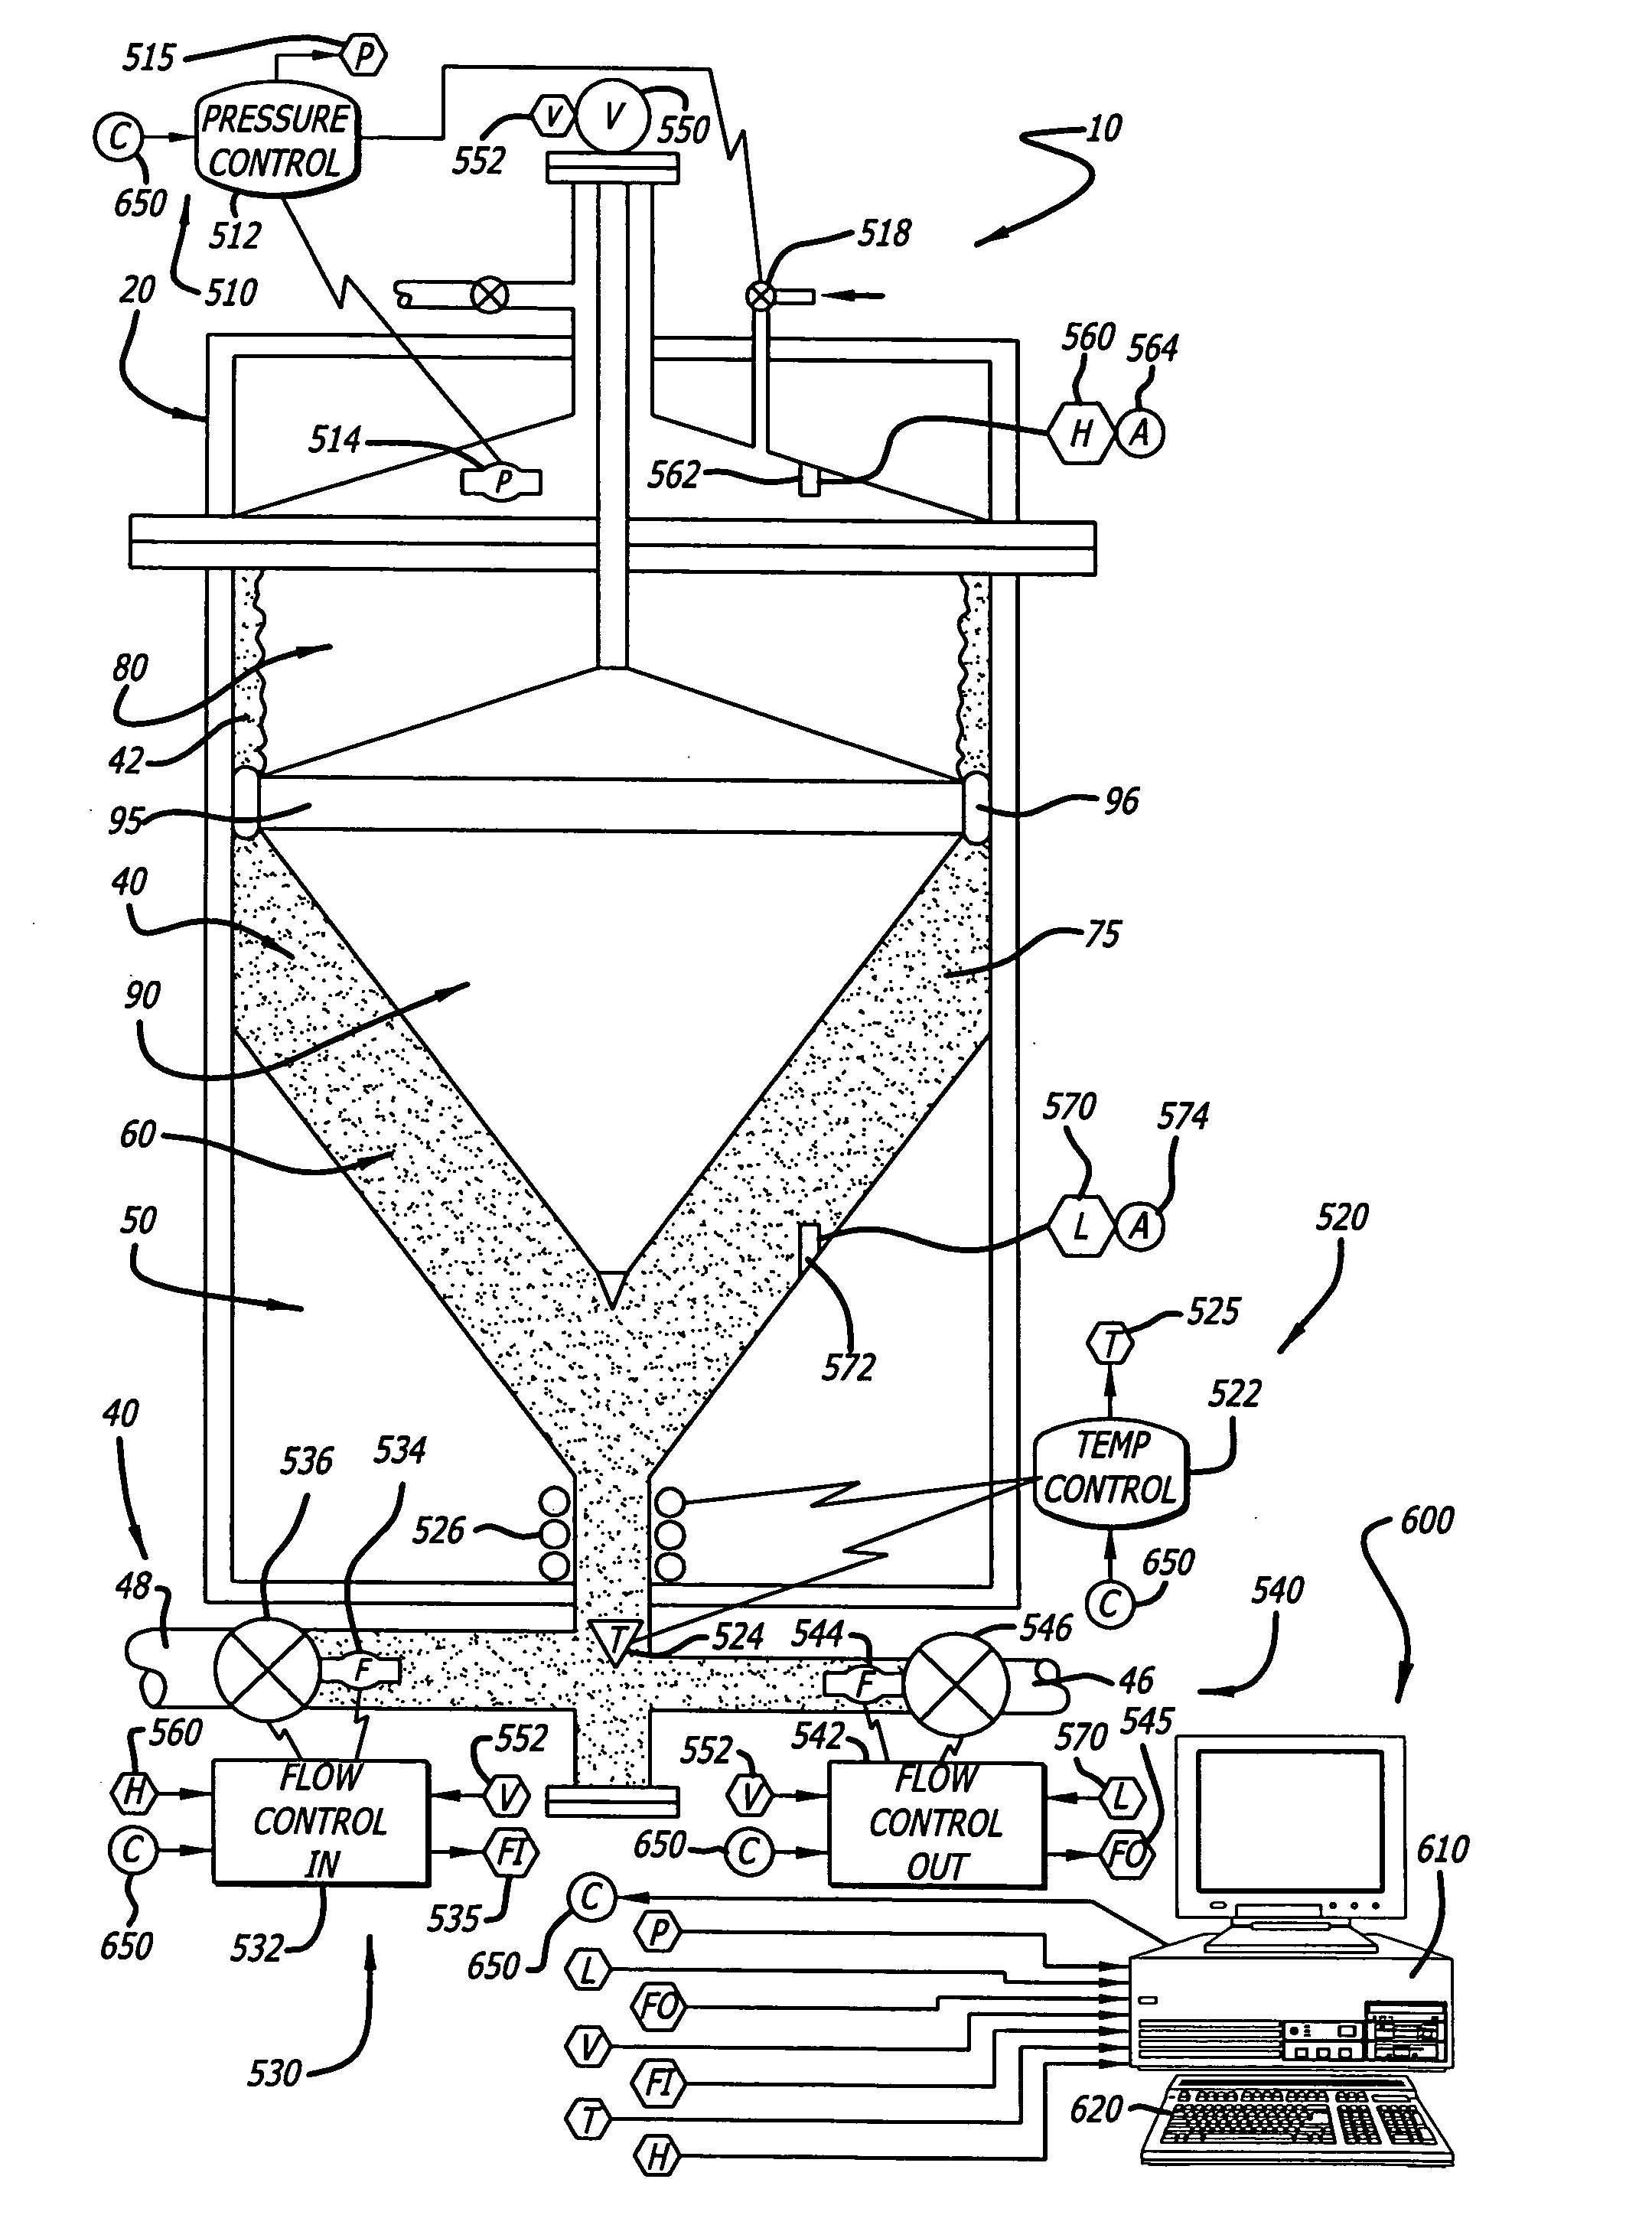 Integrated material transfer and dispensing system